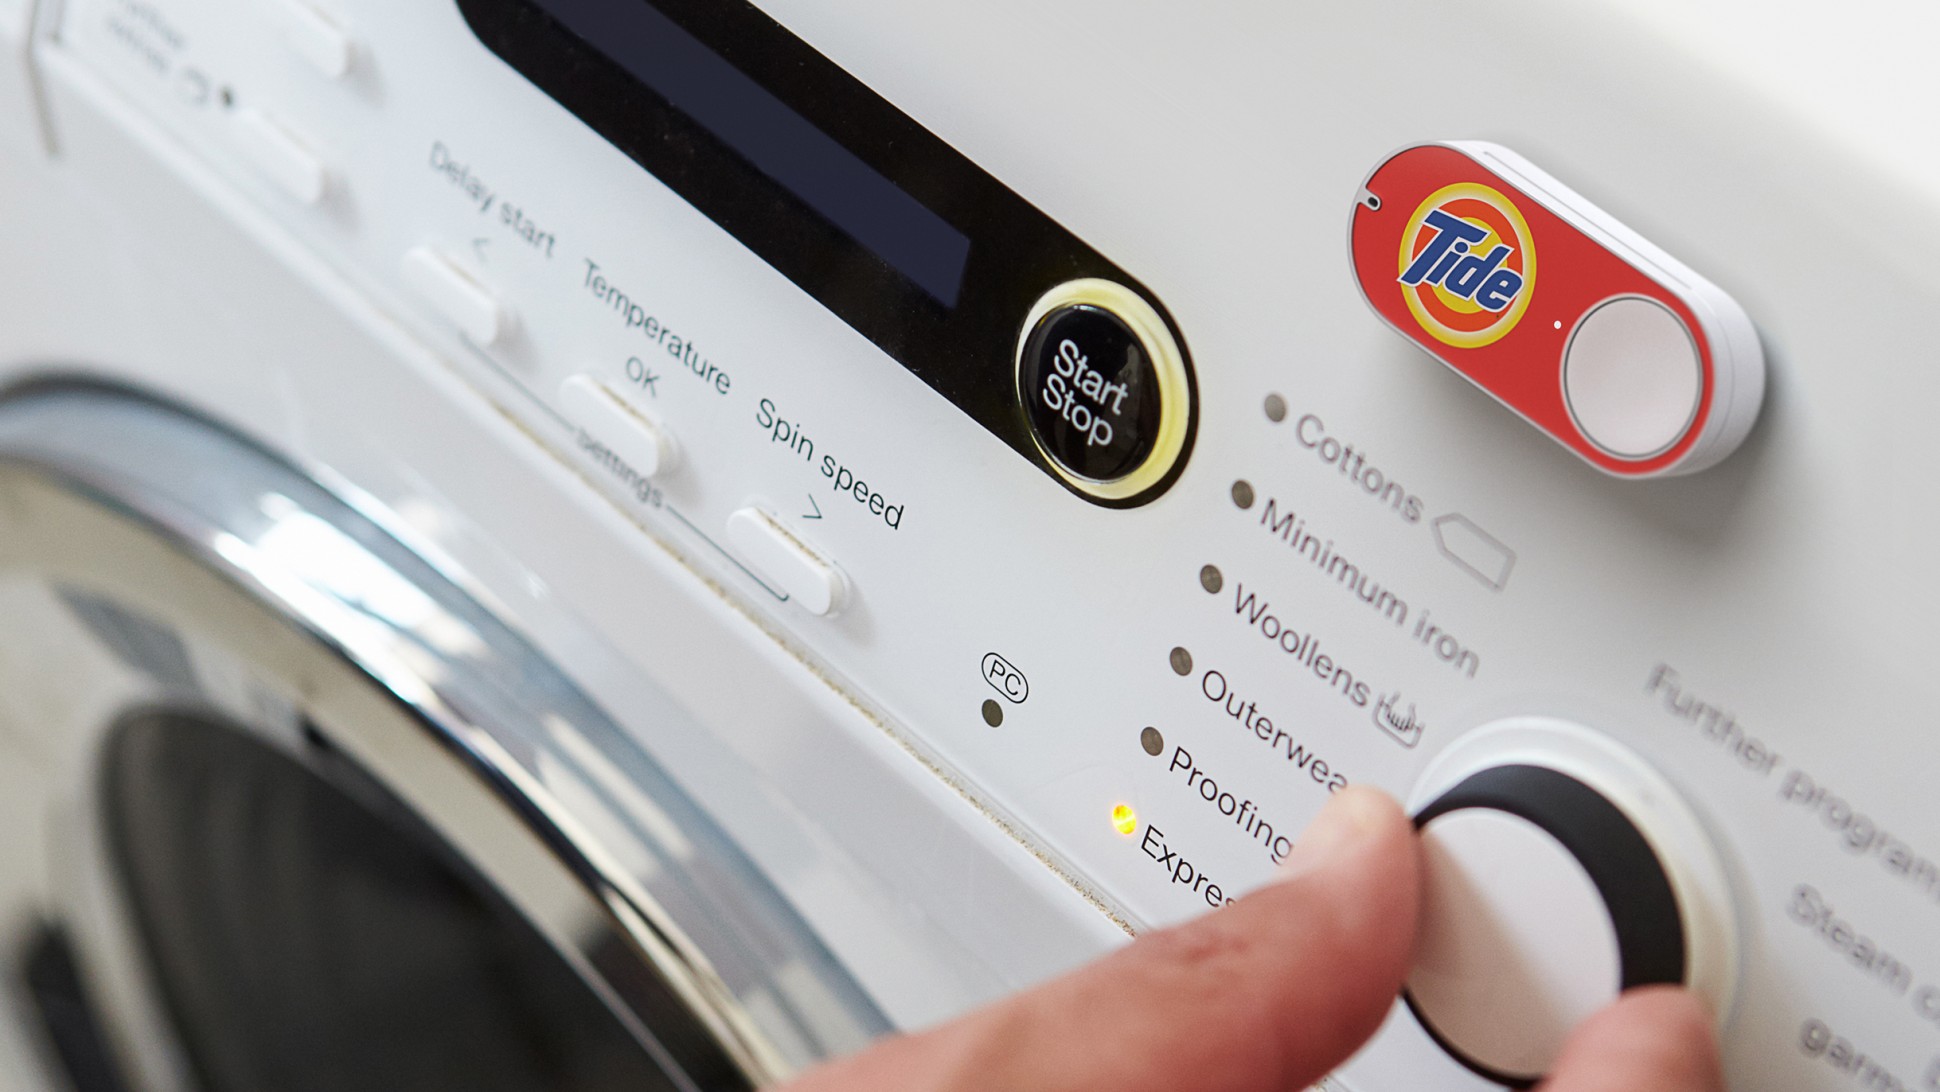 A Dash button for everything – Amazon has 163 dash buttons now